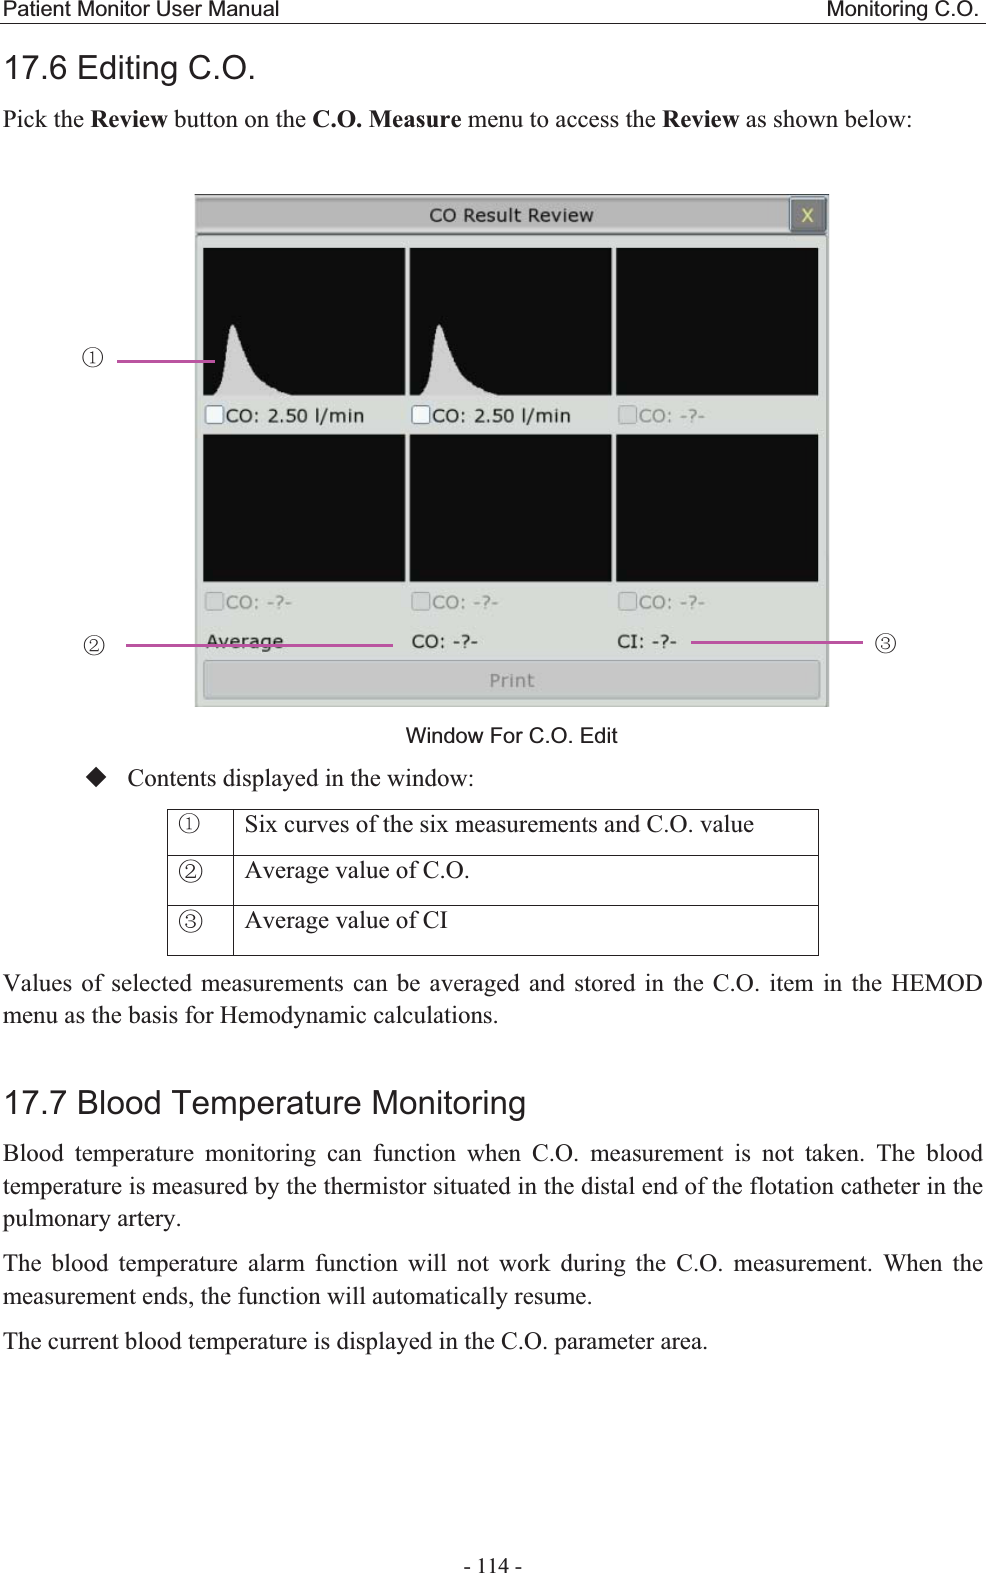 Patient Monitor User Manual                                                  Monitoring C.O.  - 114 - 17.6 Editing C.O.  Pick the Review button on the C.O. Measure menu to access the Review as shown below:  Window For C.O. Edit Contents displayed in the window: ķ Six curves of the six measurements and C.O. valueĸ Average value of C.O.Ĺ Average value of CIValues of selected measurements can be averaged and stored in the C.O. item in the HEMOD menu as the basis for Hemodynamic calculations. 17.7 Blood Temperature MonitoringBlood temperature monitoring can function when C.O. measurement is not taken. The blood temperature is measured by the thermistor situated in the distal end of the flotation catheter in the pulmonary artery.   The blood temperature alarm function will not work during the C.O. measurement. When the measurement ends, the function will automatically resume. The current blood temperature is displayed in the C.O. parameter area.  ķ ĸ Ĺ 